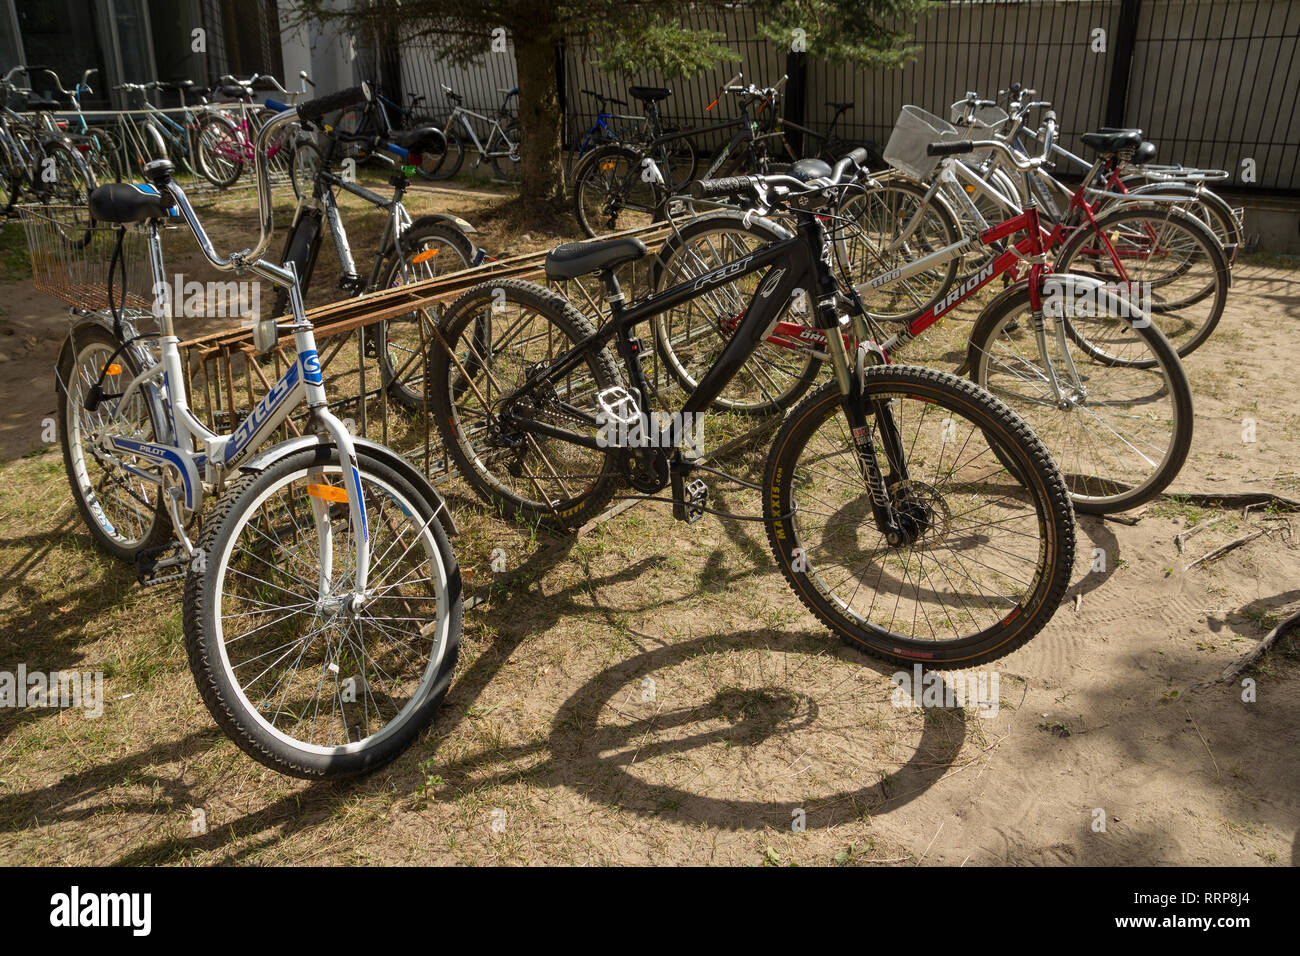 Dubna, Russia - Jul 21, 2014: Bicycles at bike-stand near the Tensor factory. Stock Photo